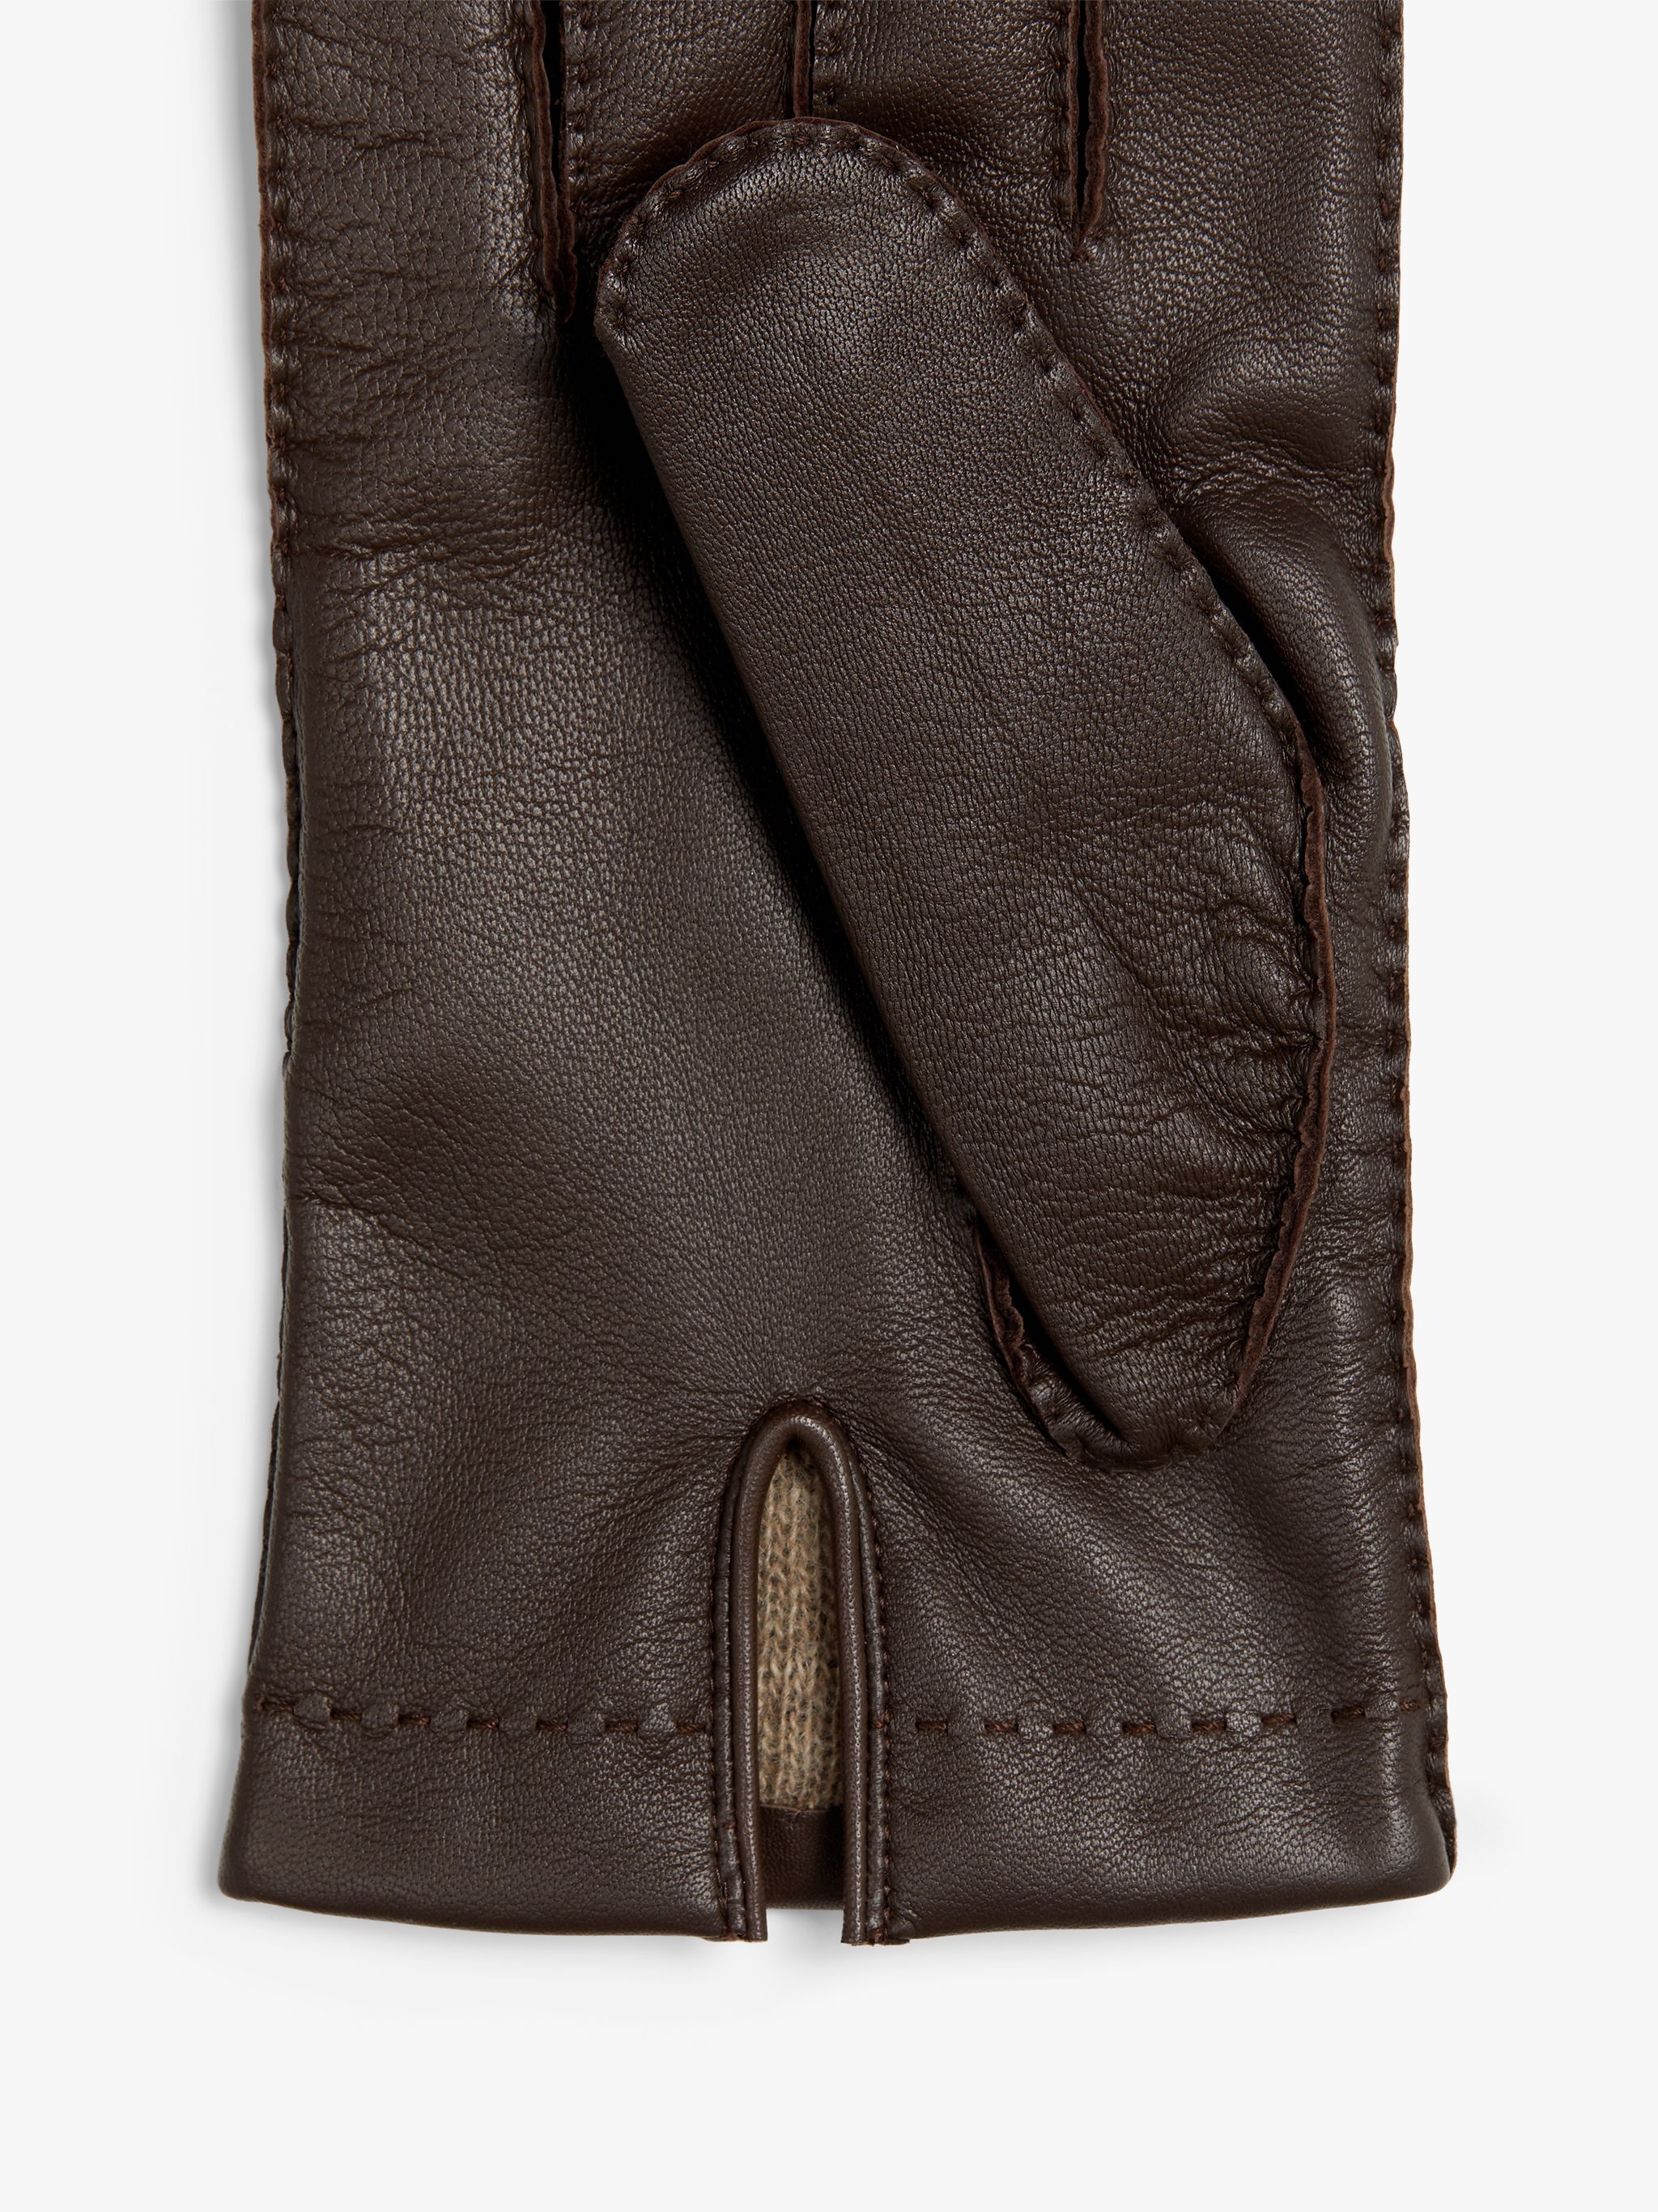 BROWN HAIRSHEEP LEATHER CASHMERE LINED GLOVES - 2